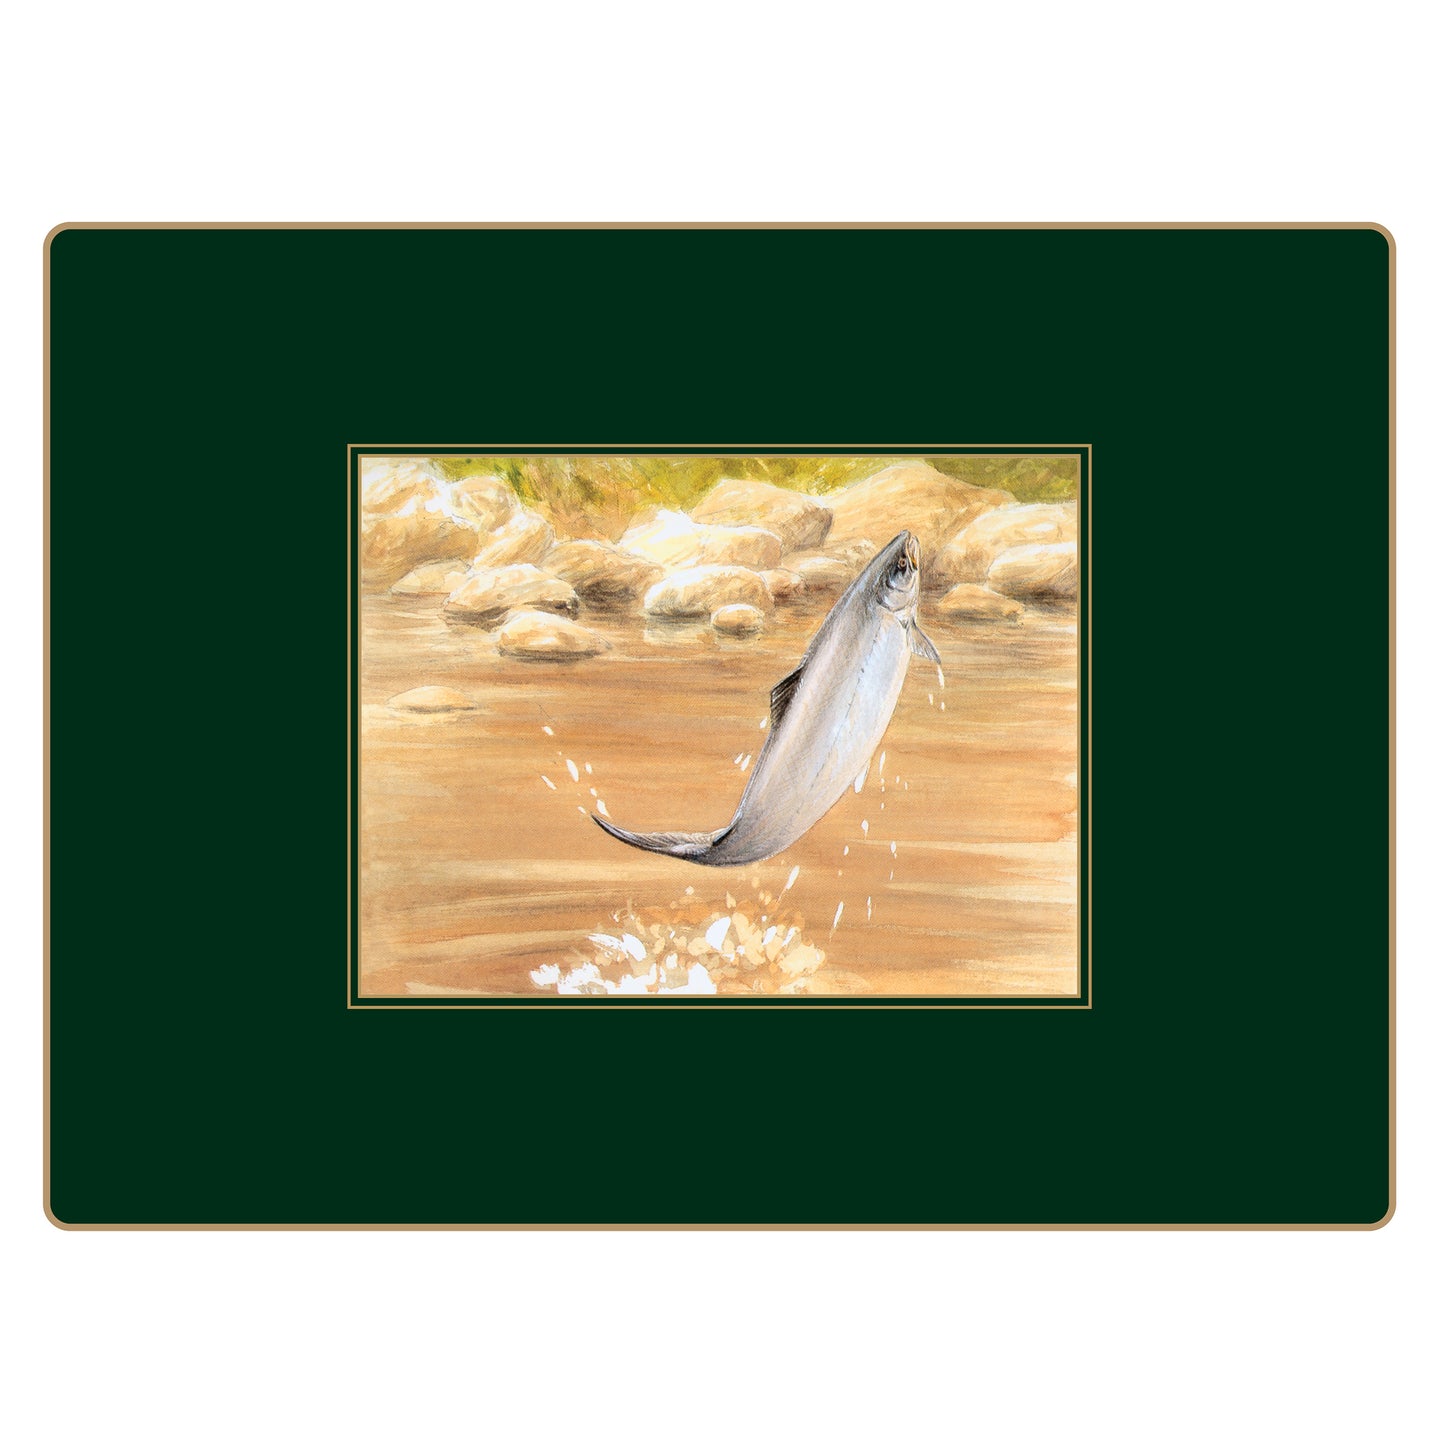 Traditional Continental Placemats Game Fish